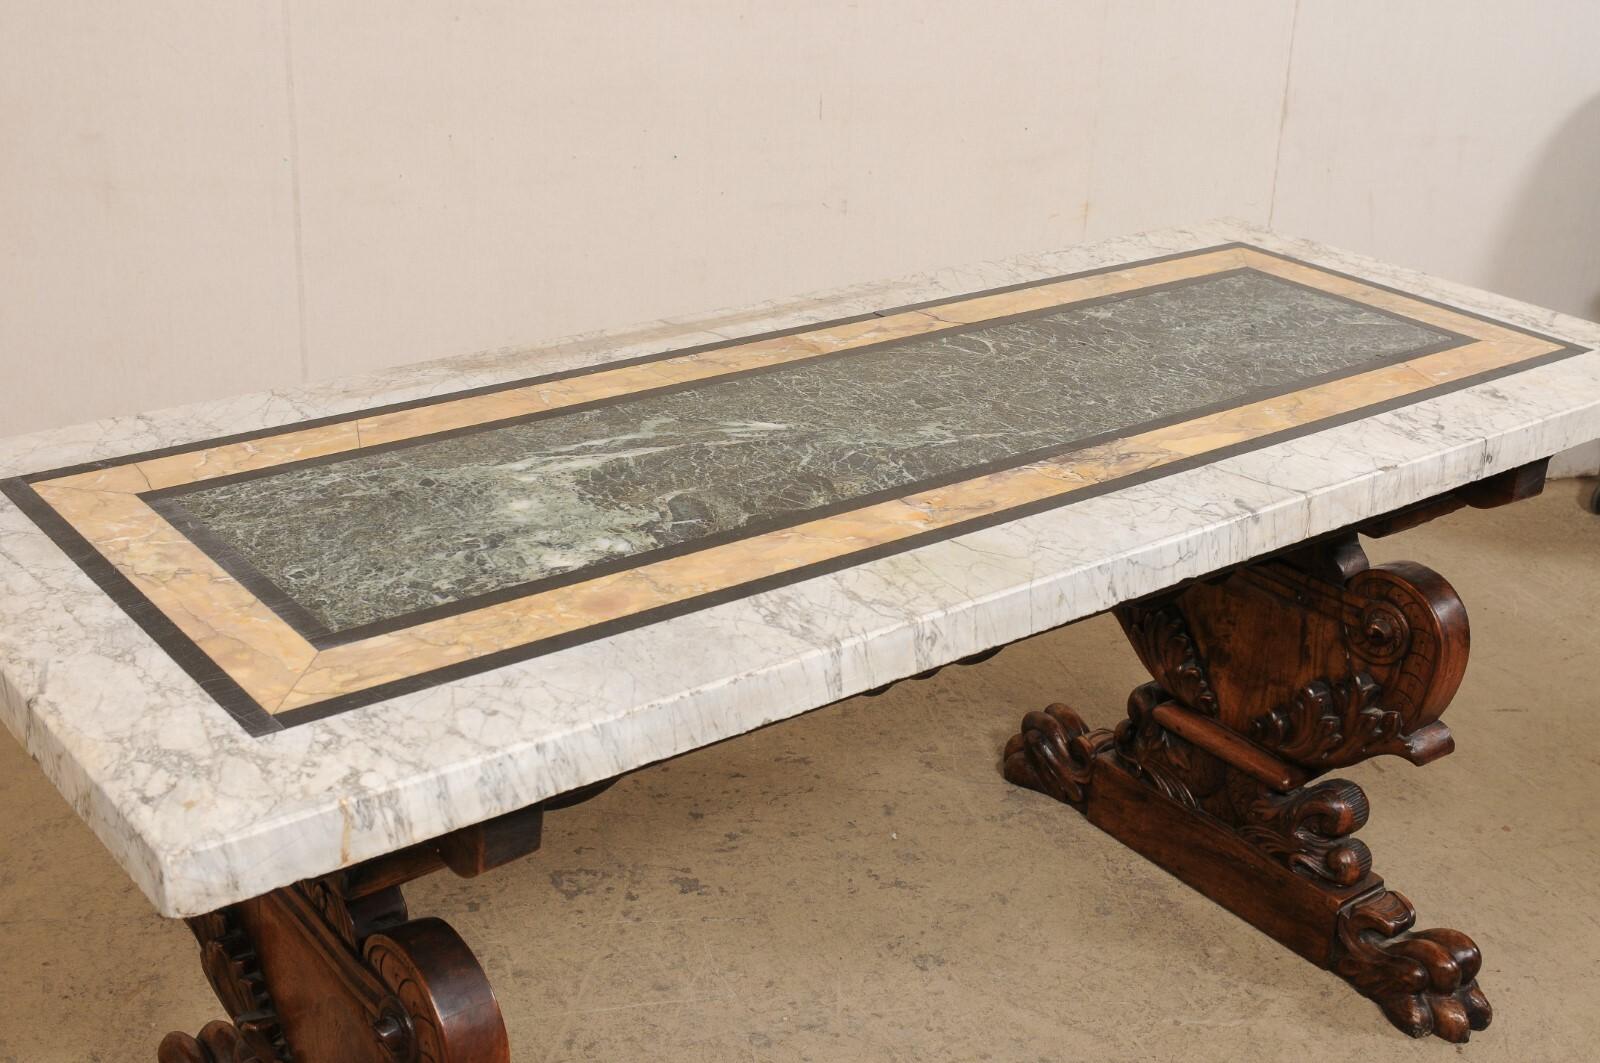 A Gorgeous 18th C Italian Inlaid Marble Top Table w/Robustly Carved Trestle Legs For Sale 3